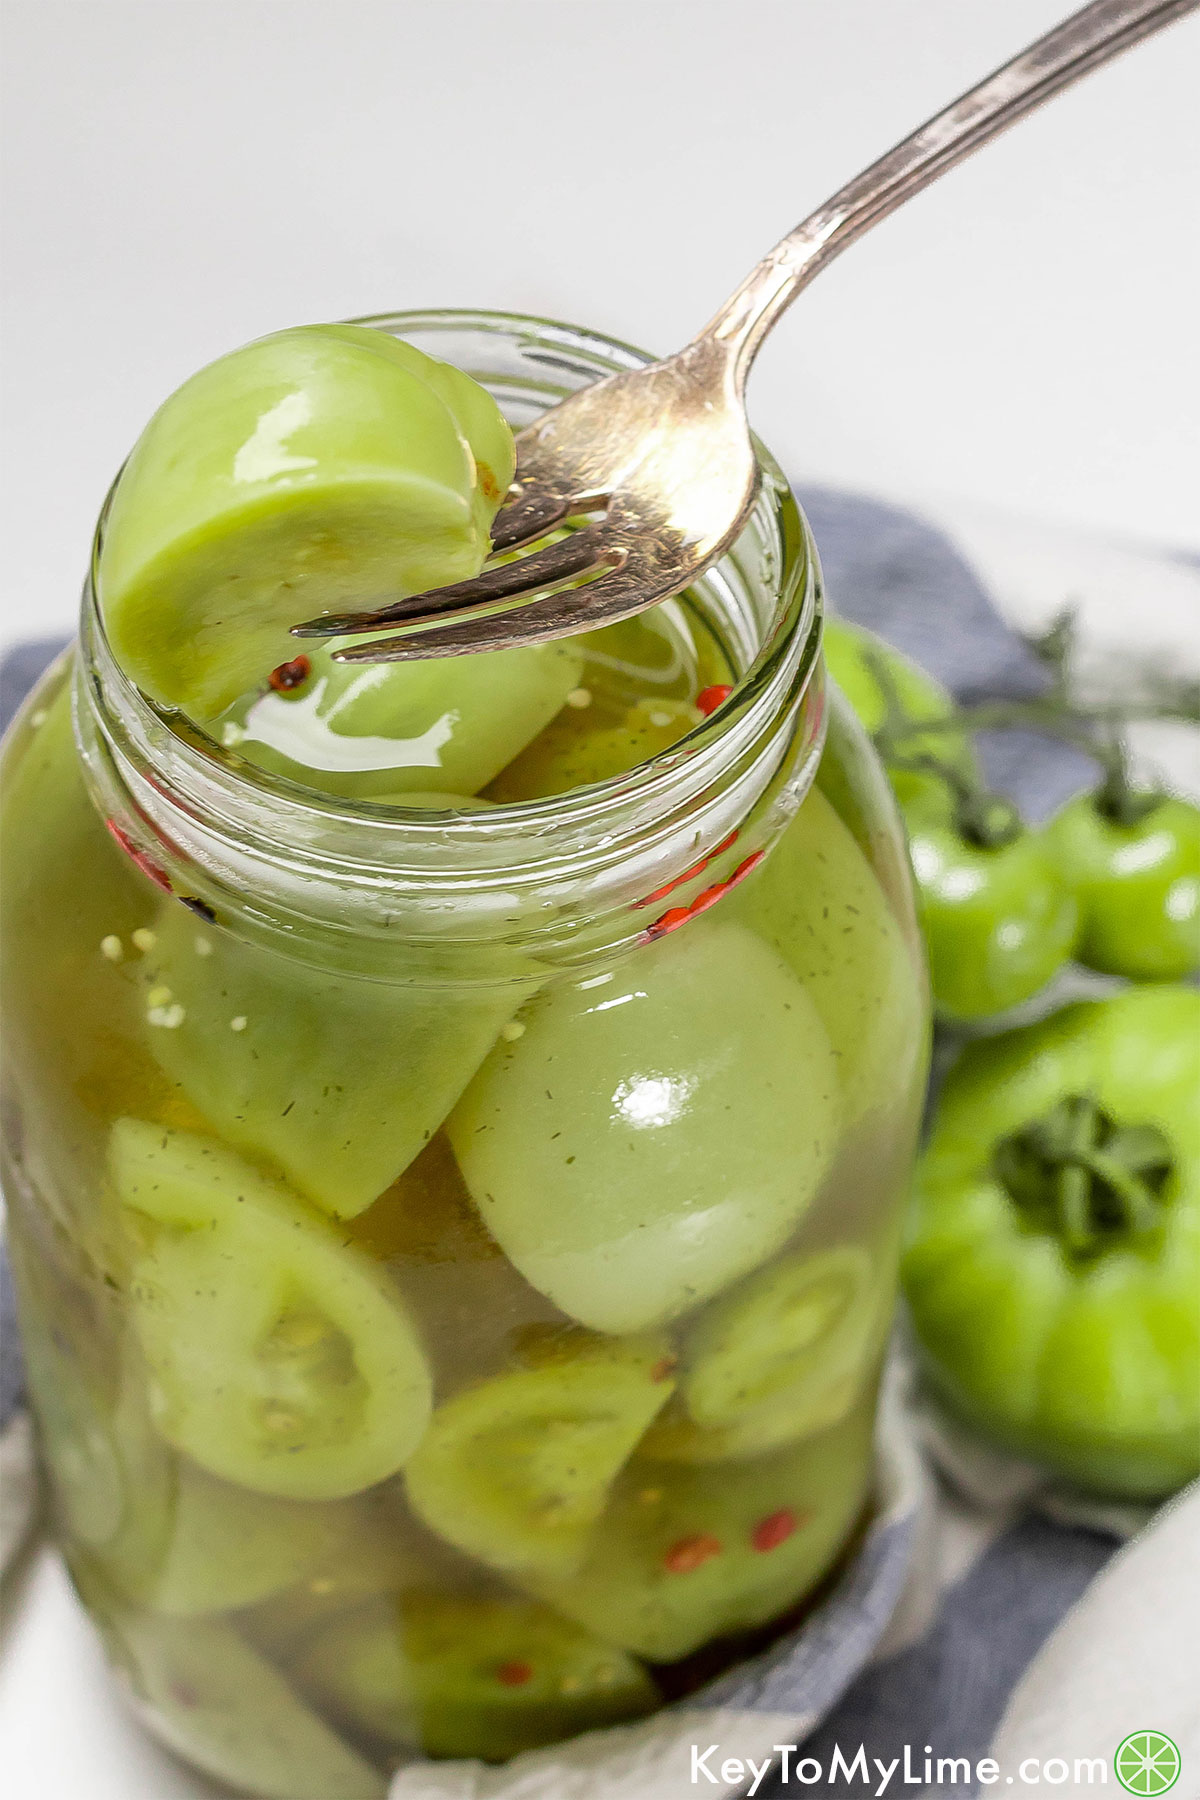 A fork holding a pickled green tomato fresh out of a jar.